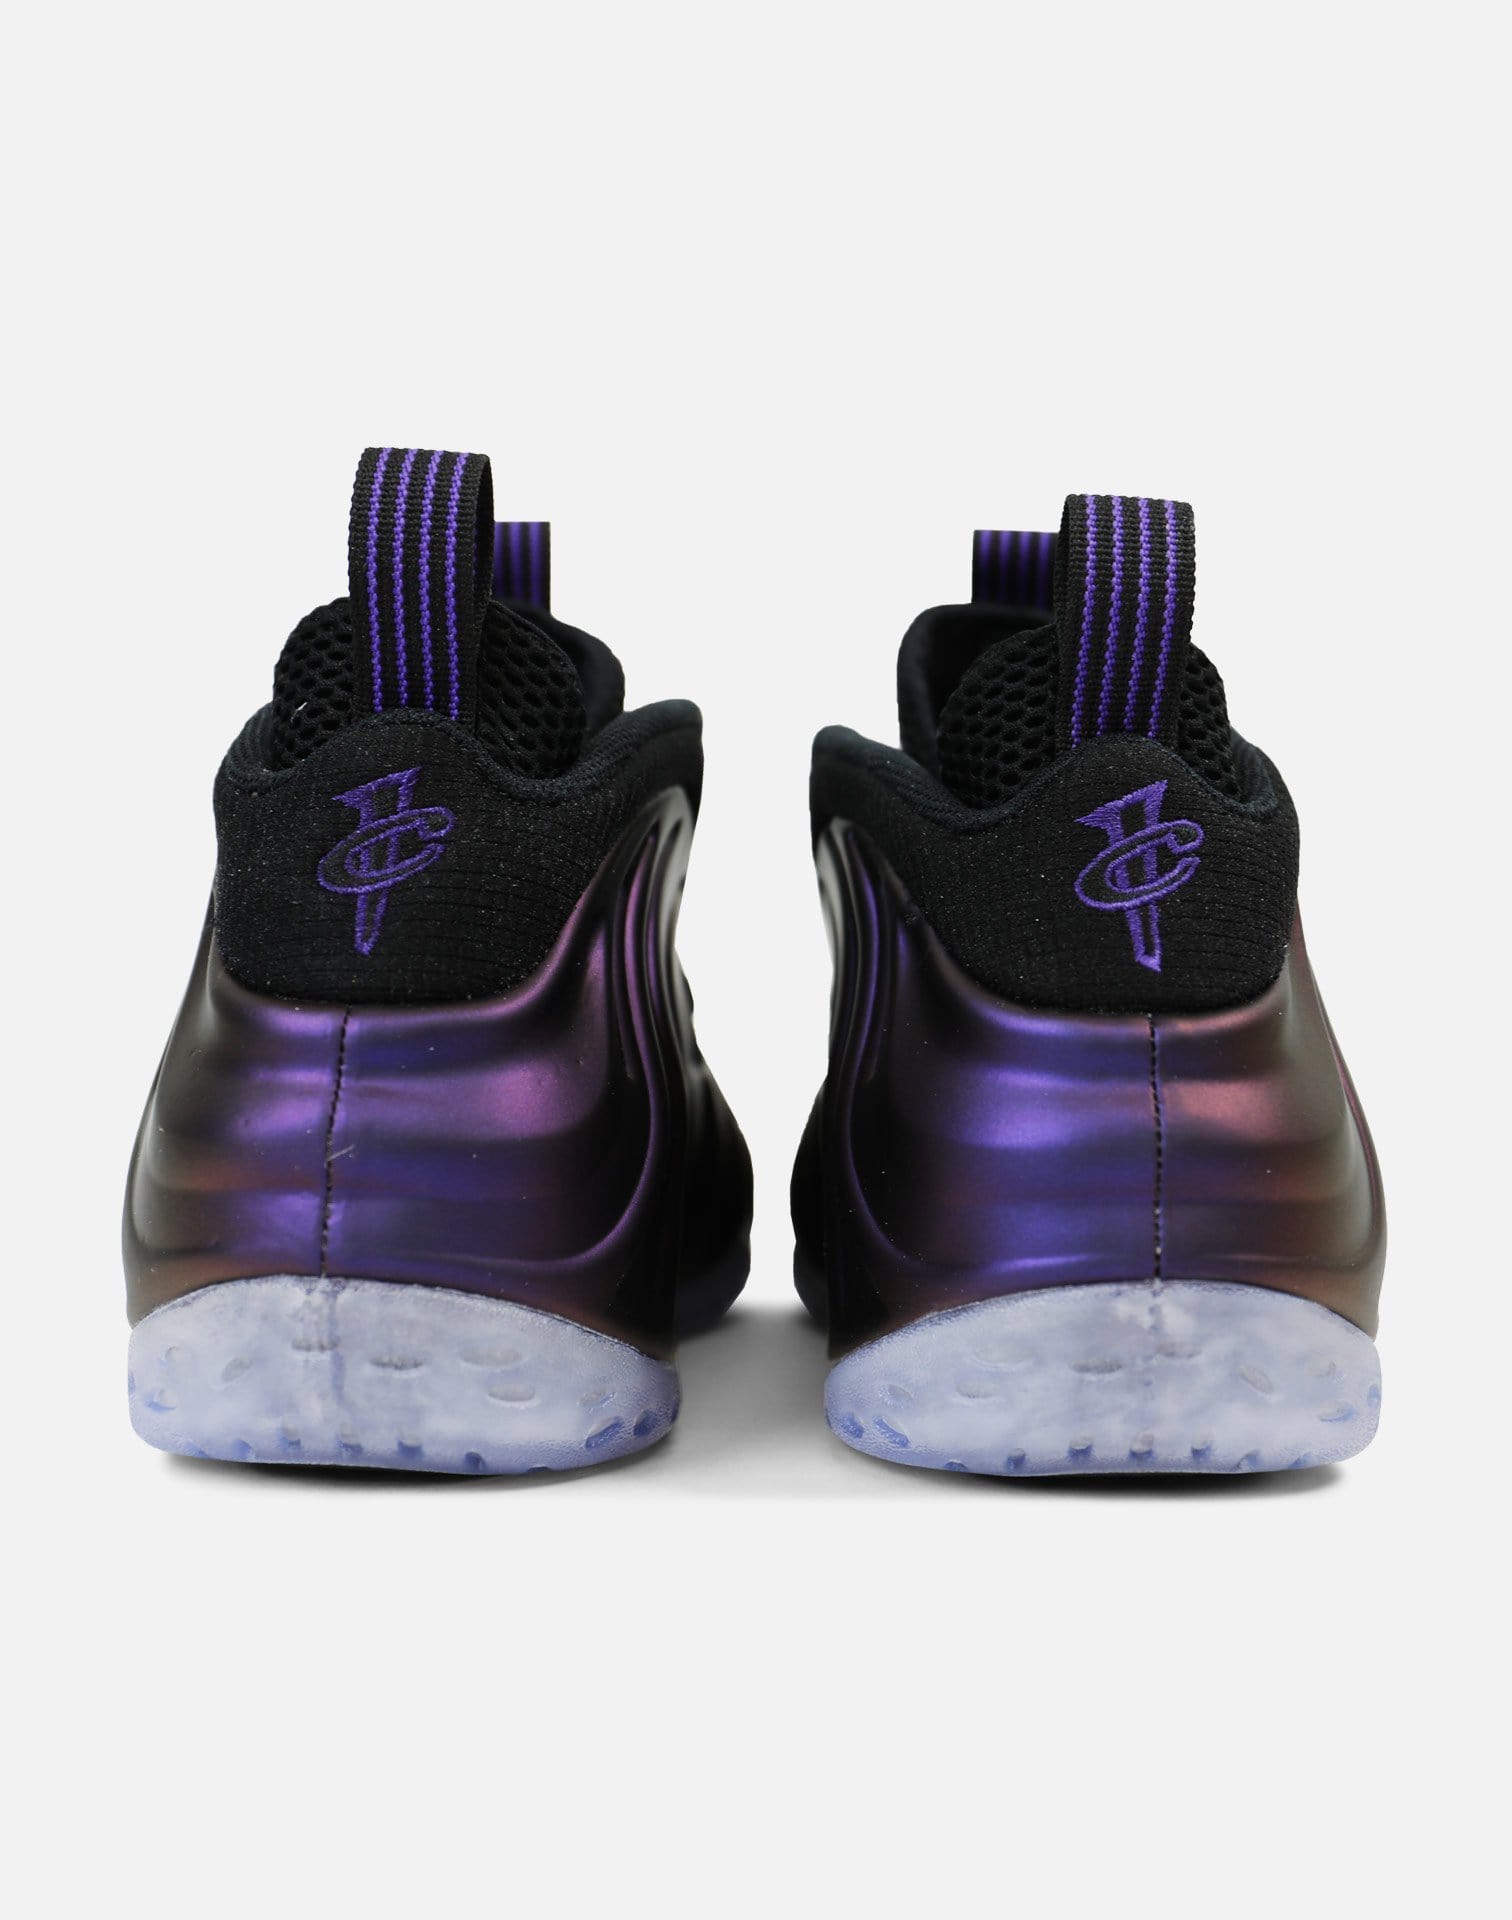 AIR FOAMPOSITE ONE 'EGGPLANT' – DTLR